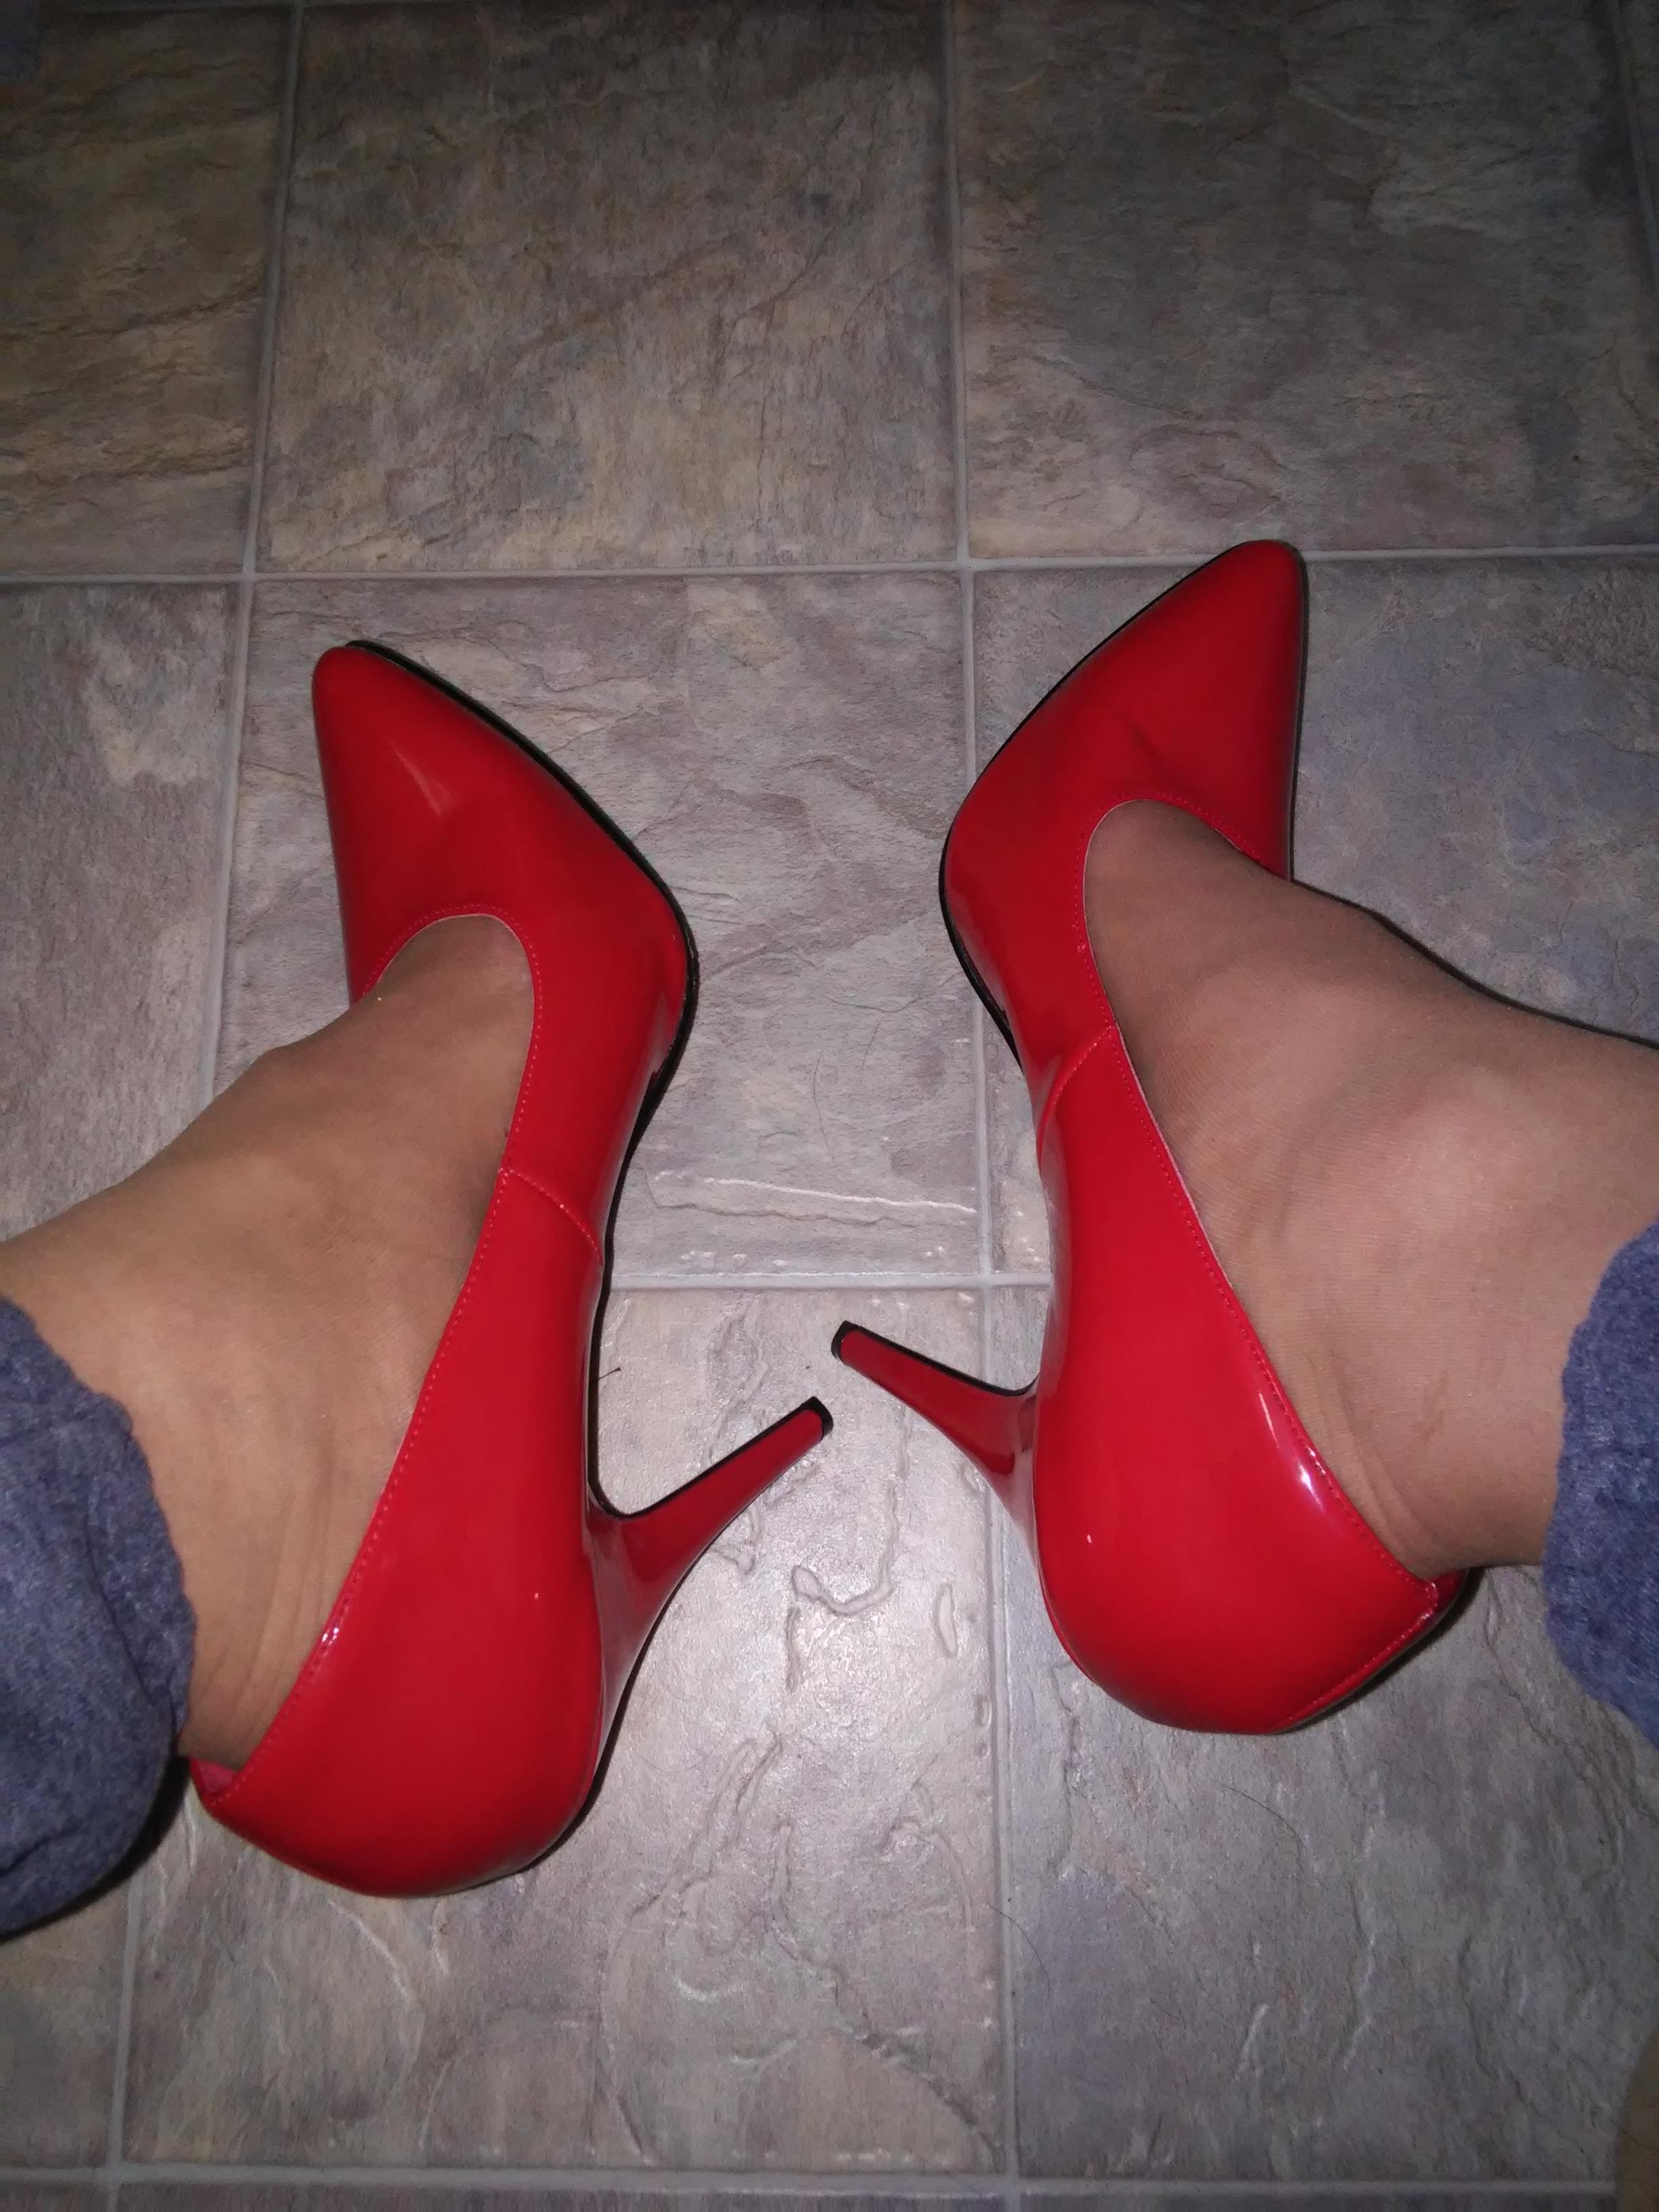 For the gf guys, LV Red Bottom Stilettos Heels. After Hours Of Searching,  I'm Admitting My Need for Help. : r/FashionReps